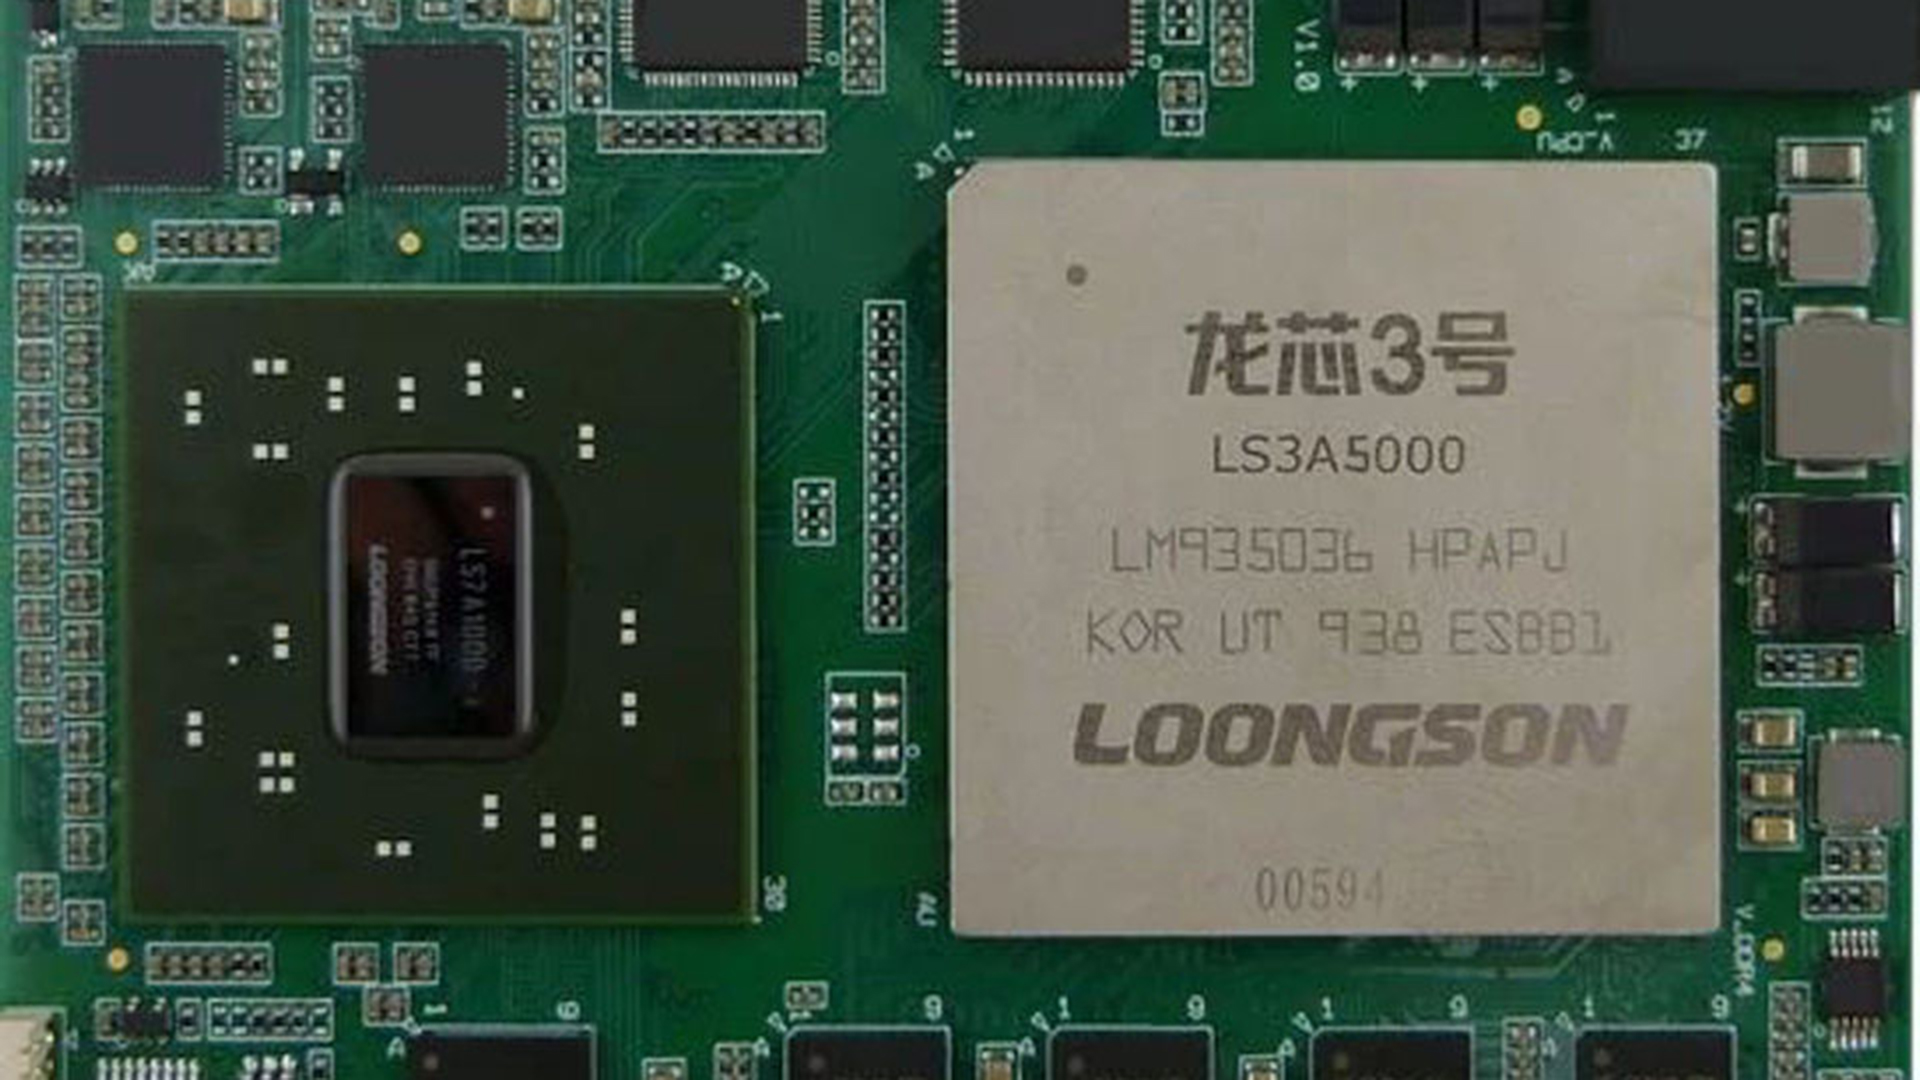 The Loongson 3A5000 could give the big players something else to worry about. Image: HKEPC.